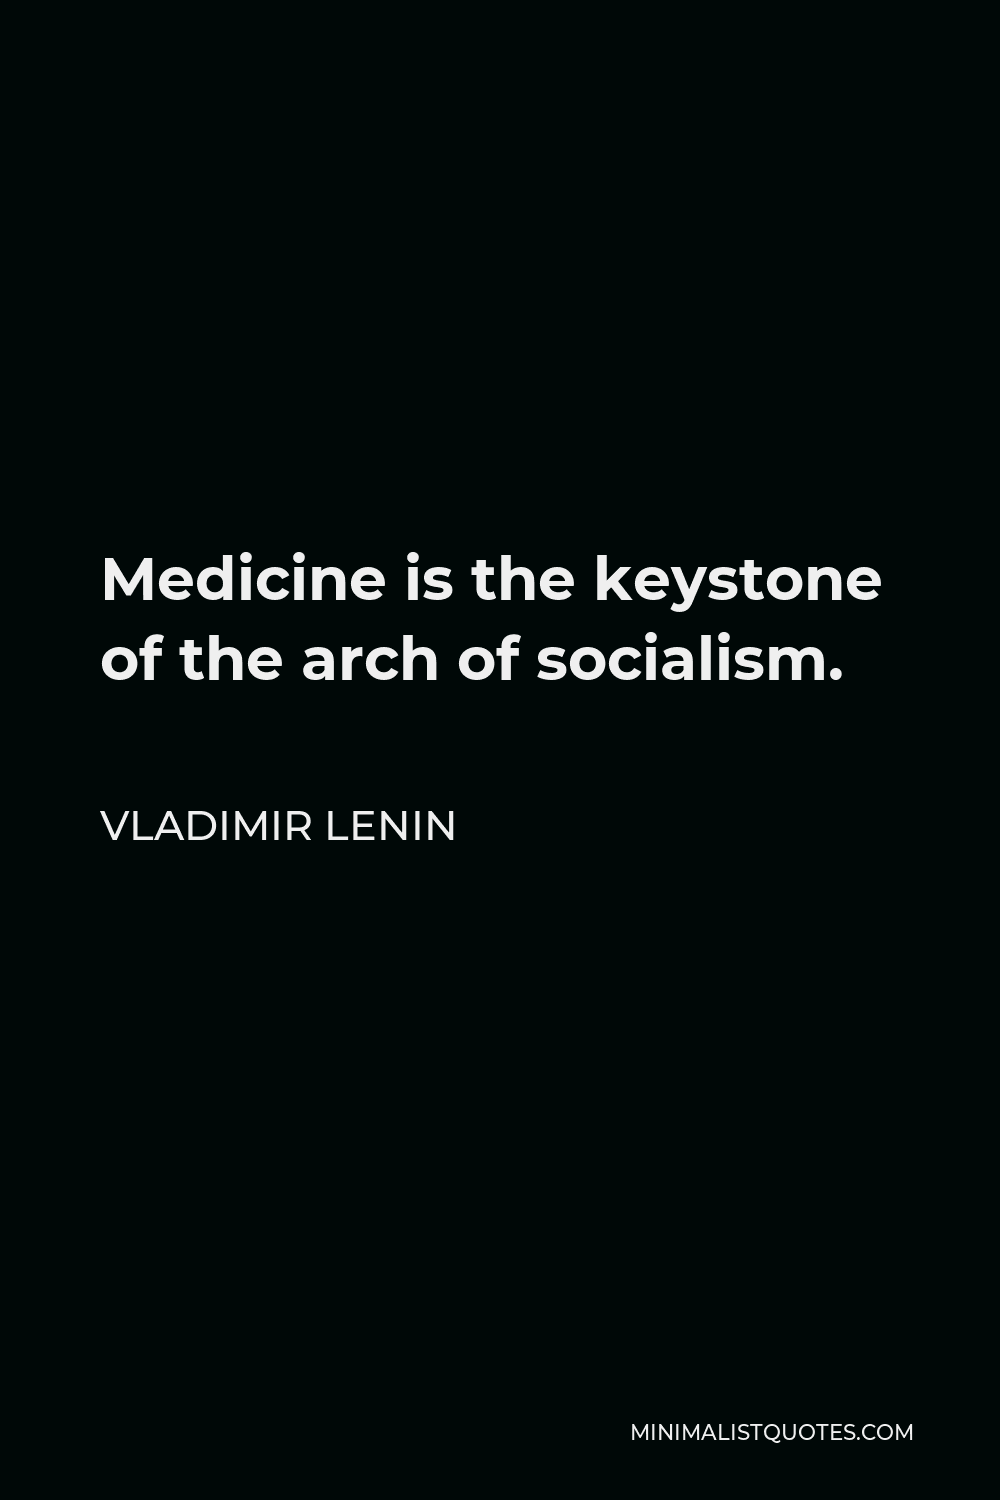 Vladimir Lenin Quote - Medicine is the keystone of the arch of socialism.